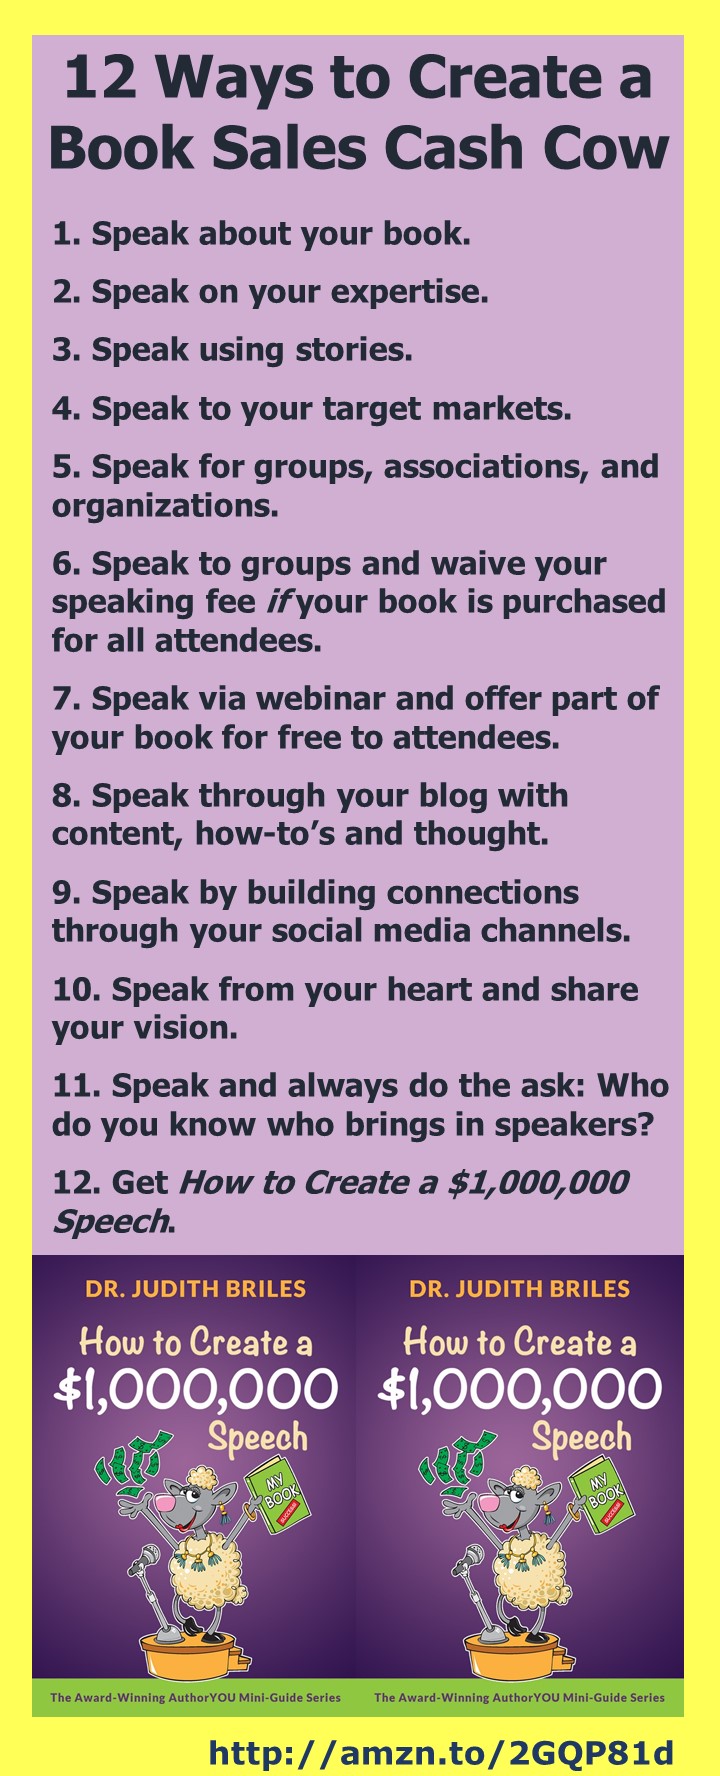 Book Marketing Tips: Here are 12 ways to create a book sales channel that really makes you money. Learn how to create a speaking career that helps you sell more and more books. Tips from Judith Briles.